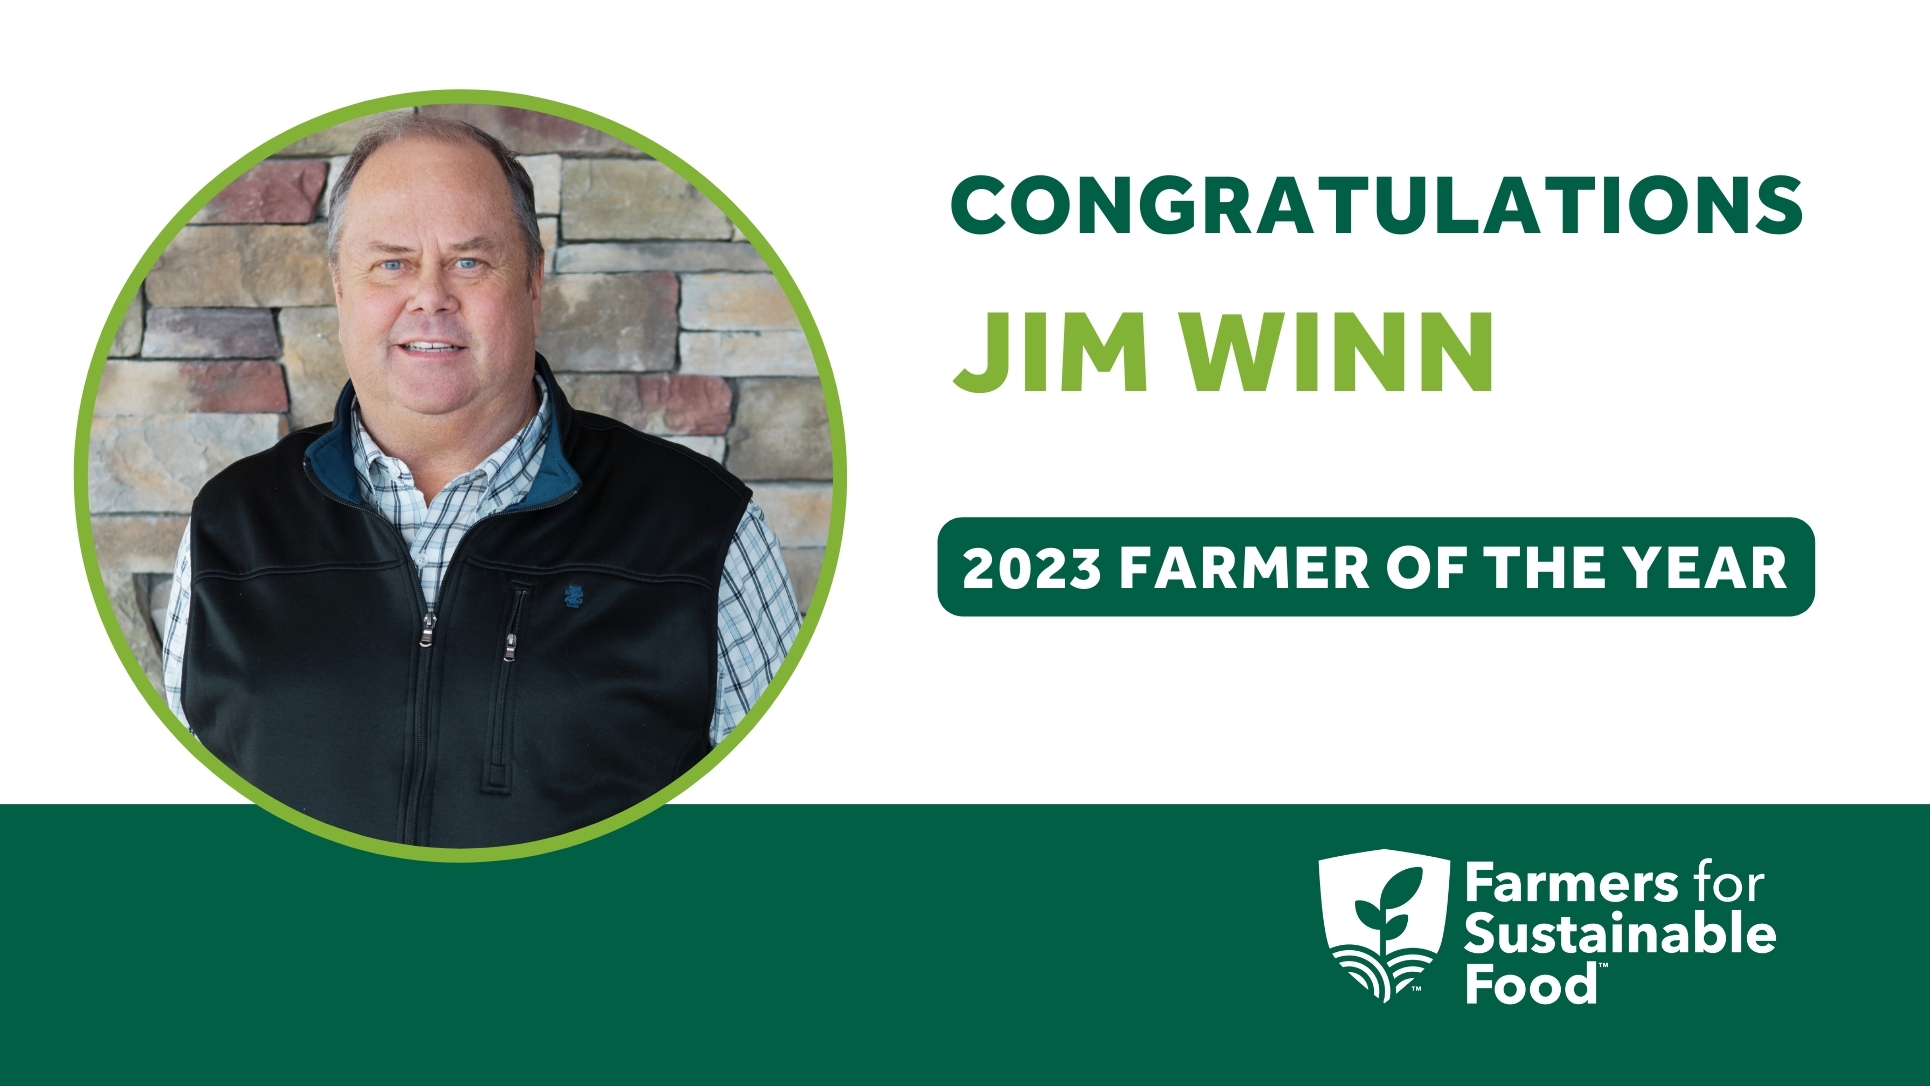 Conservation leader Jim Winn honored at Sustainable Agriculture Summit 